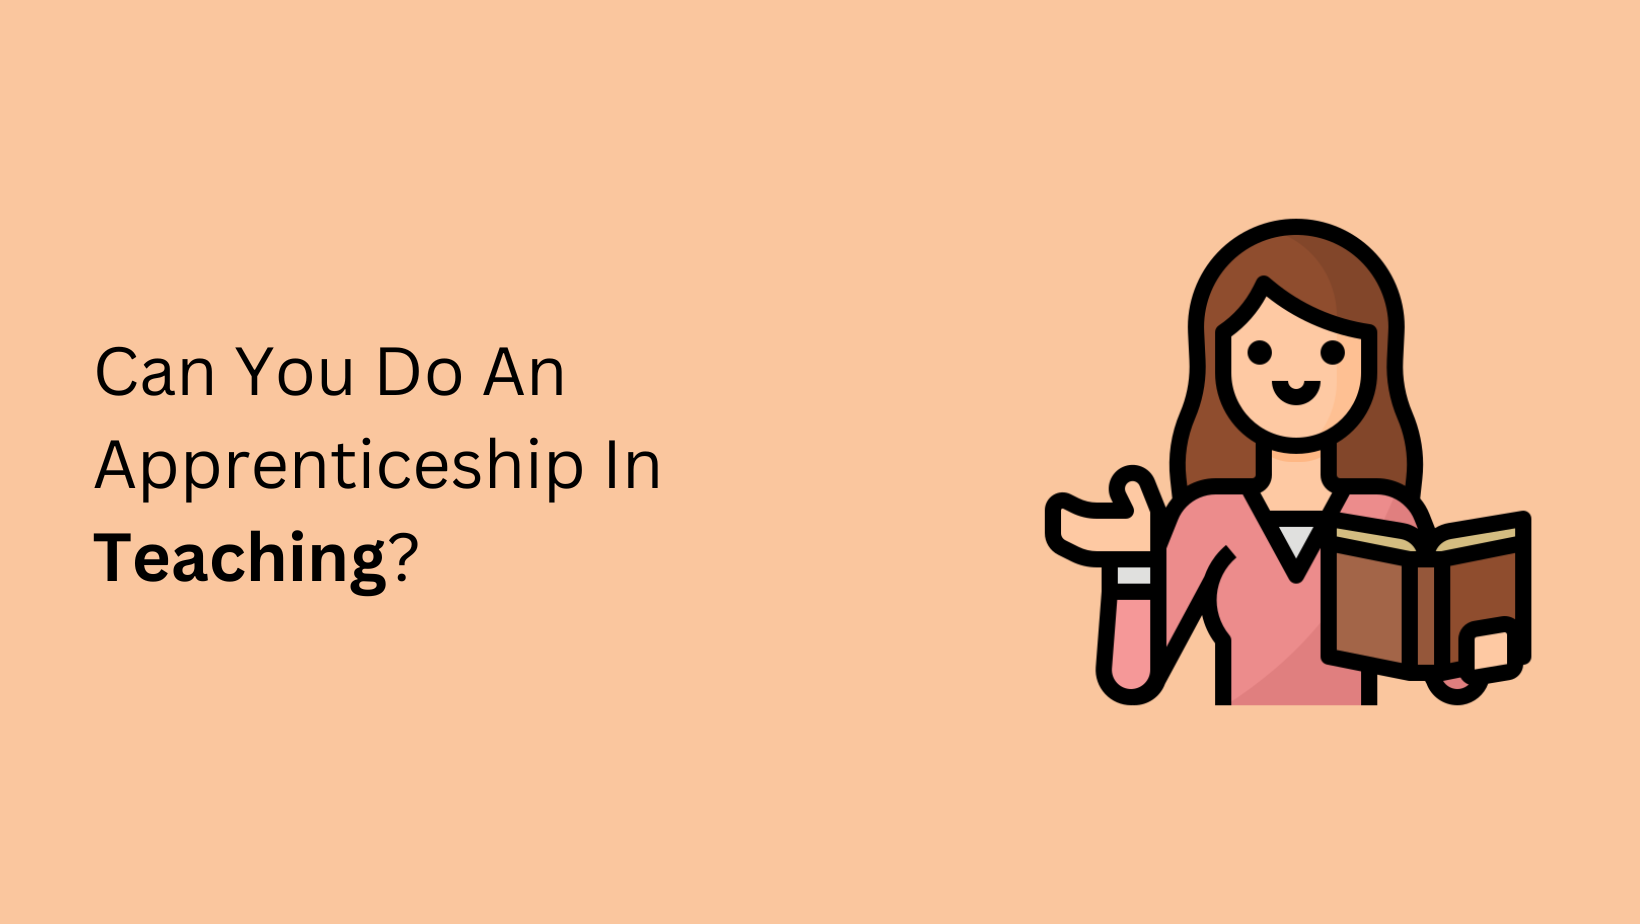 Can You Do An Apprenticeship In Teaching